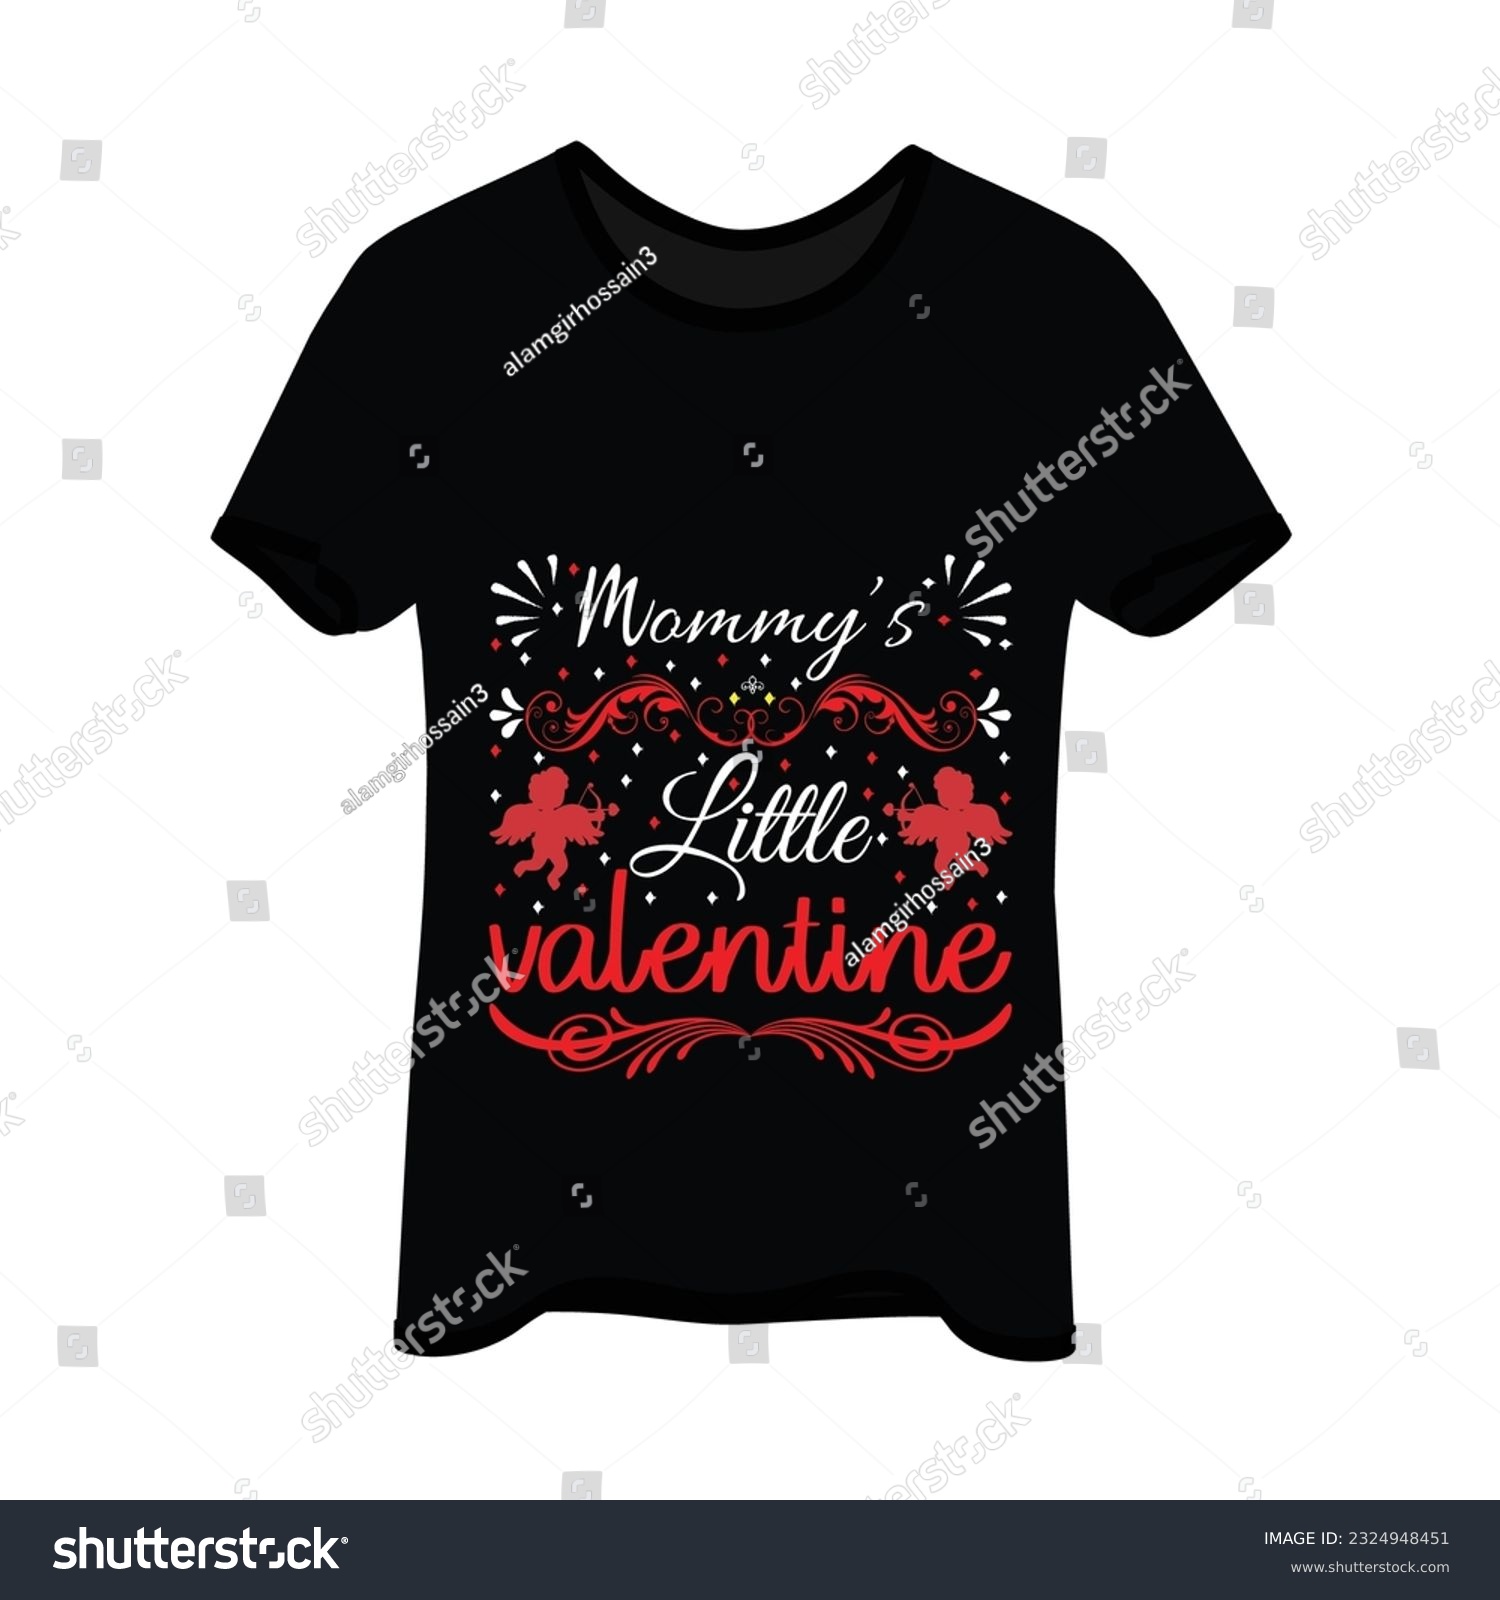 SVG of Mommy's little valentine 3 t-shirt design. Here You Can find and Buy t-Shirt Design. Digital Files for yourself, friends and family, or anyone who supports your Special Day and Occasions. svg